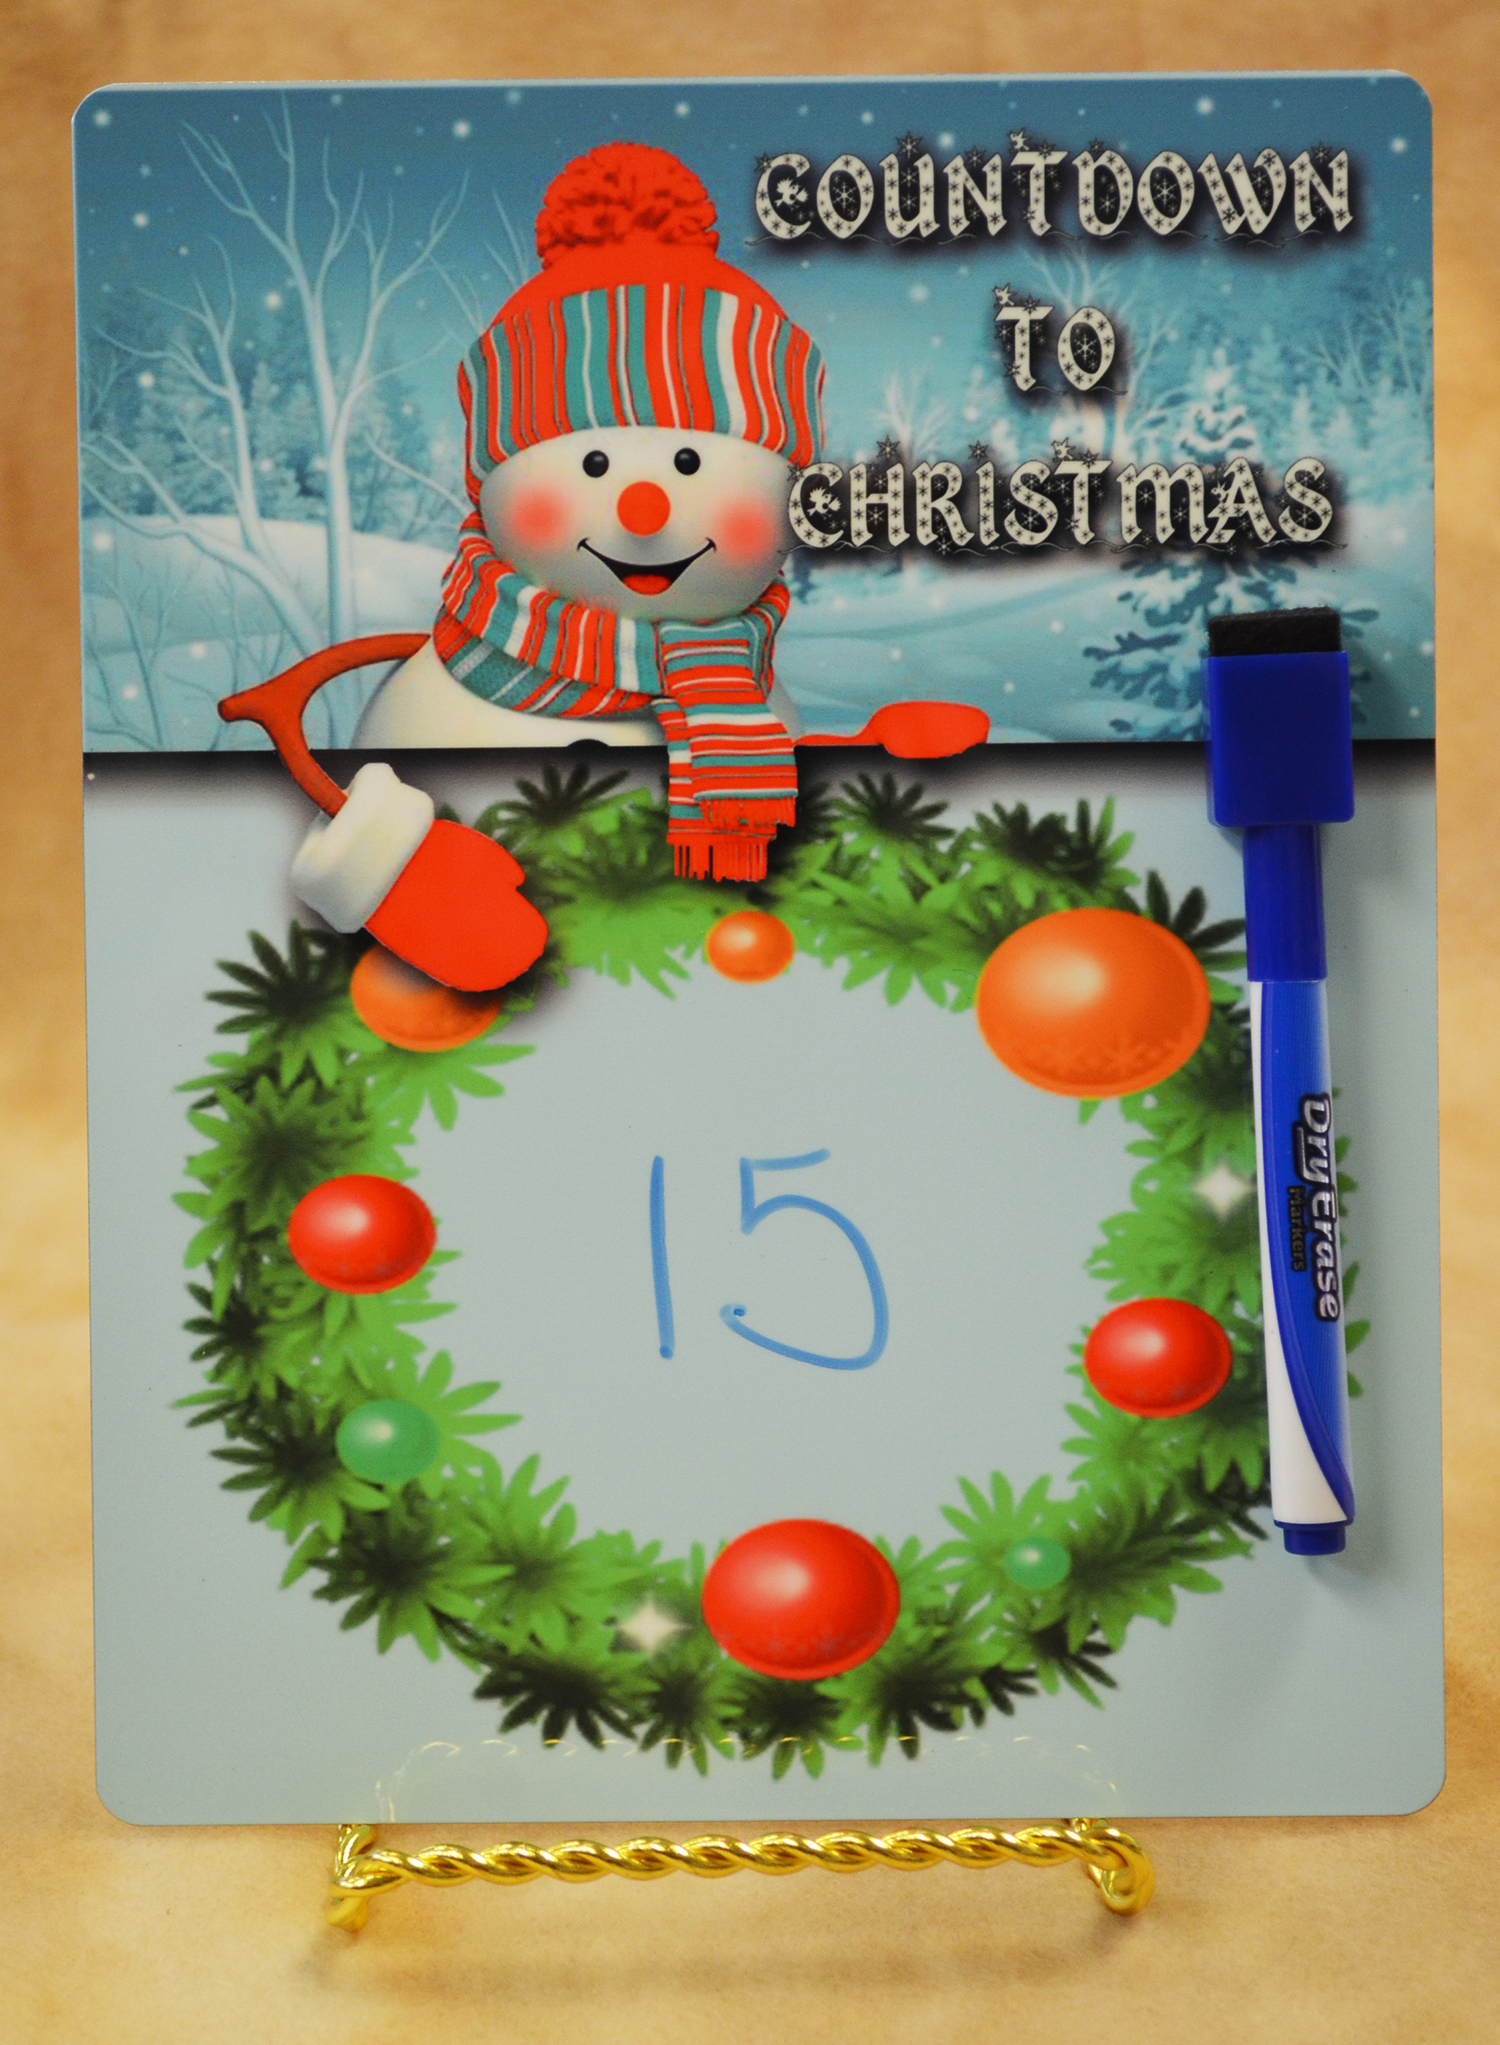 Countdown To Christmas made with sublimation printing